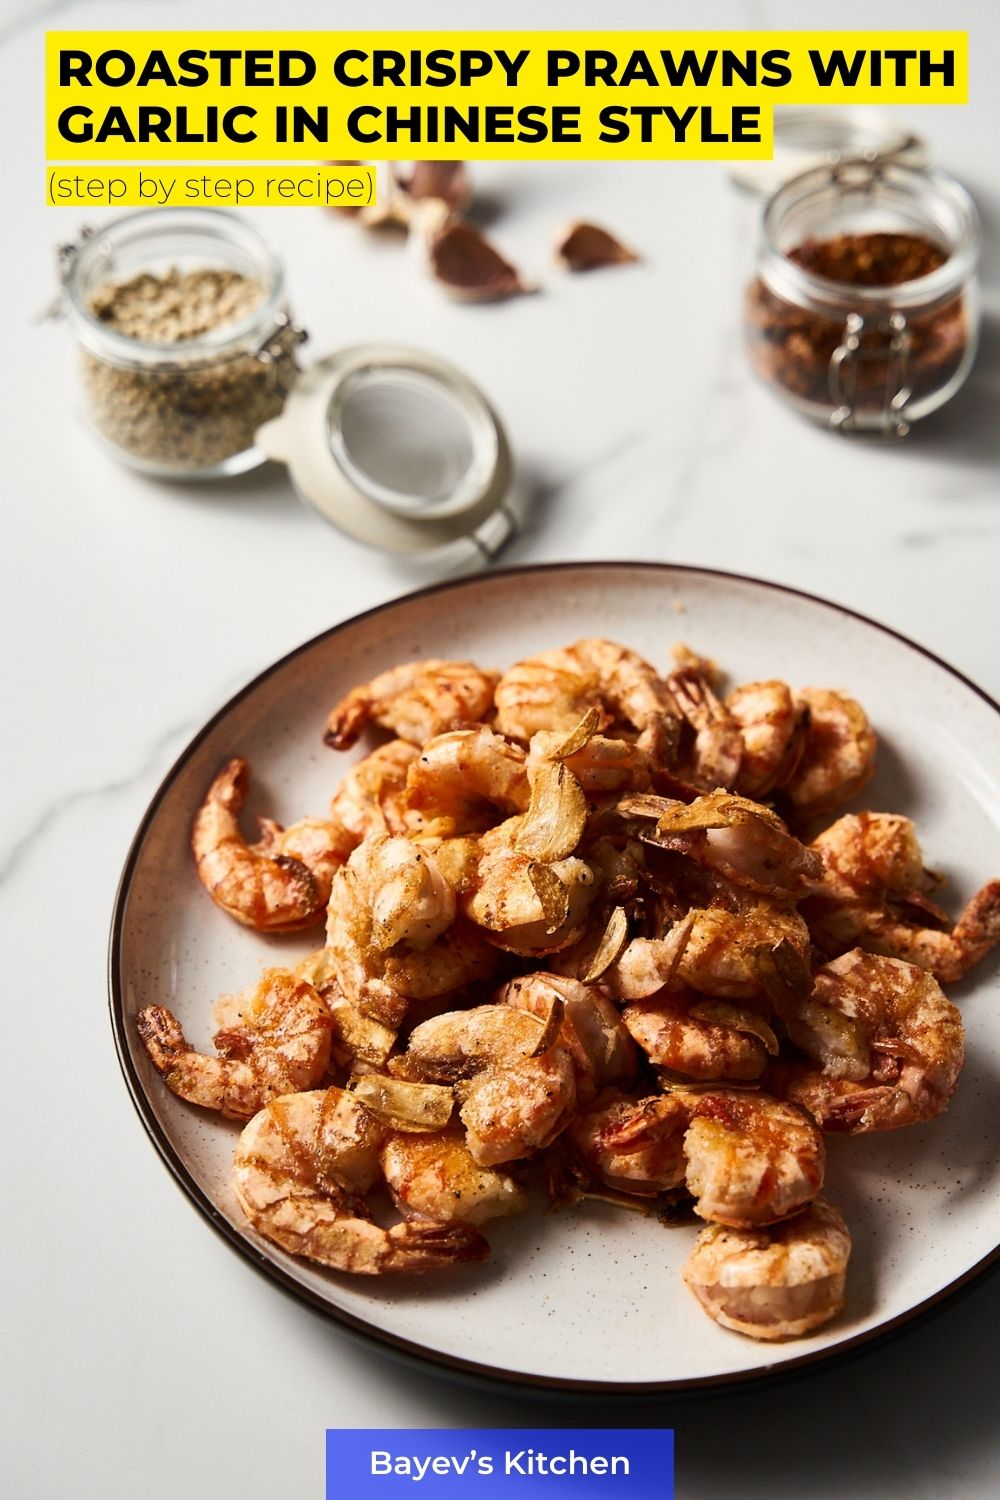 Roasted Crispy Prawns with Garlic in Chinese Style by bayevskitchen.com